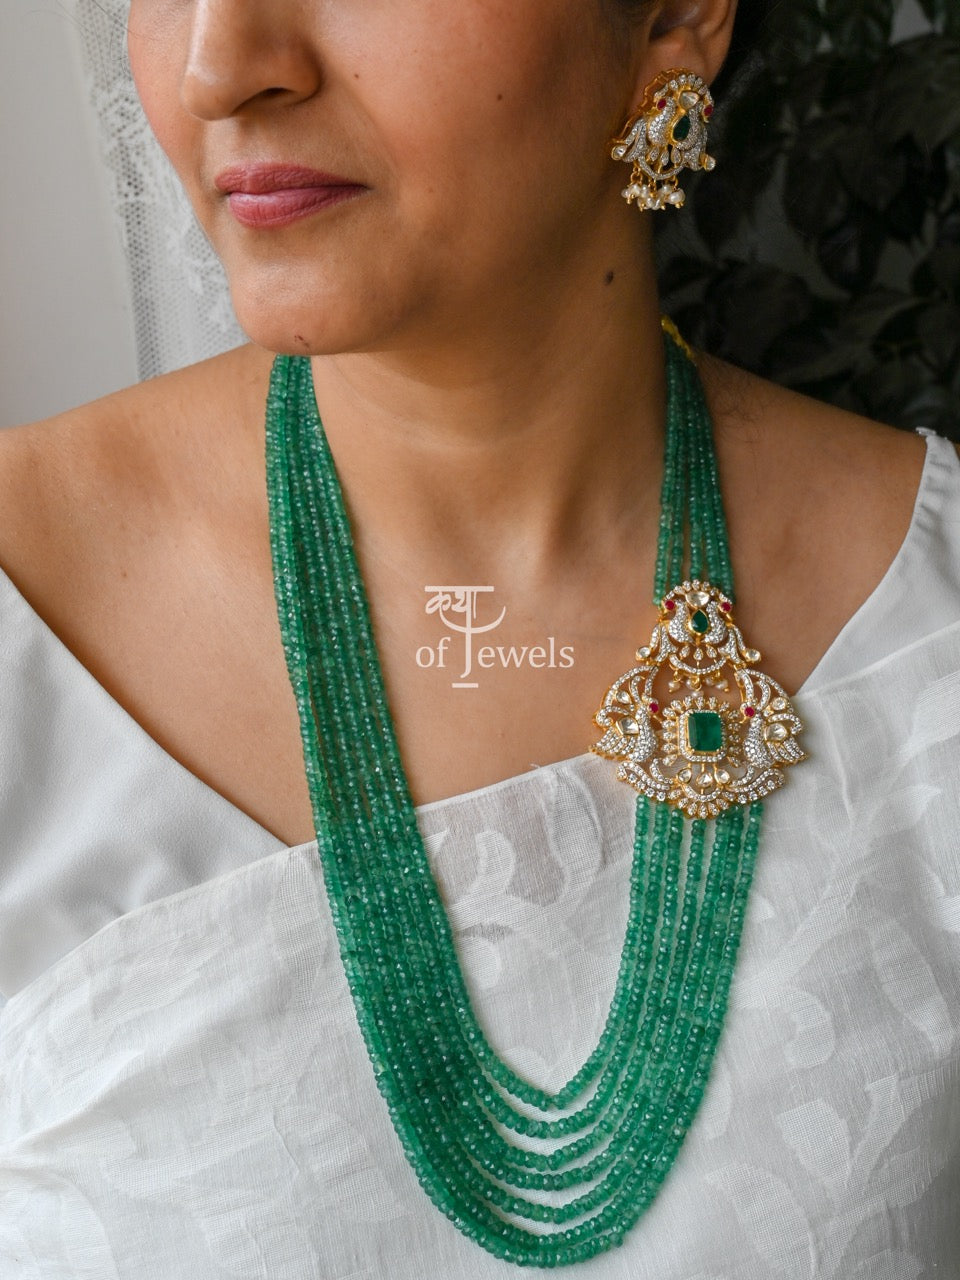 Very Exclusive Necklace and Earrings made using 92.5 Silver